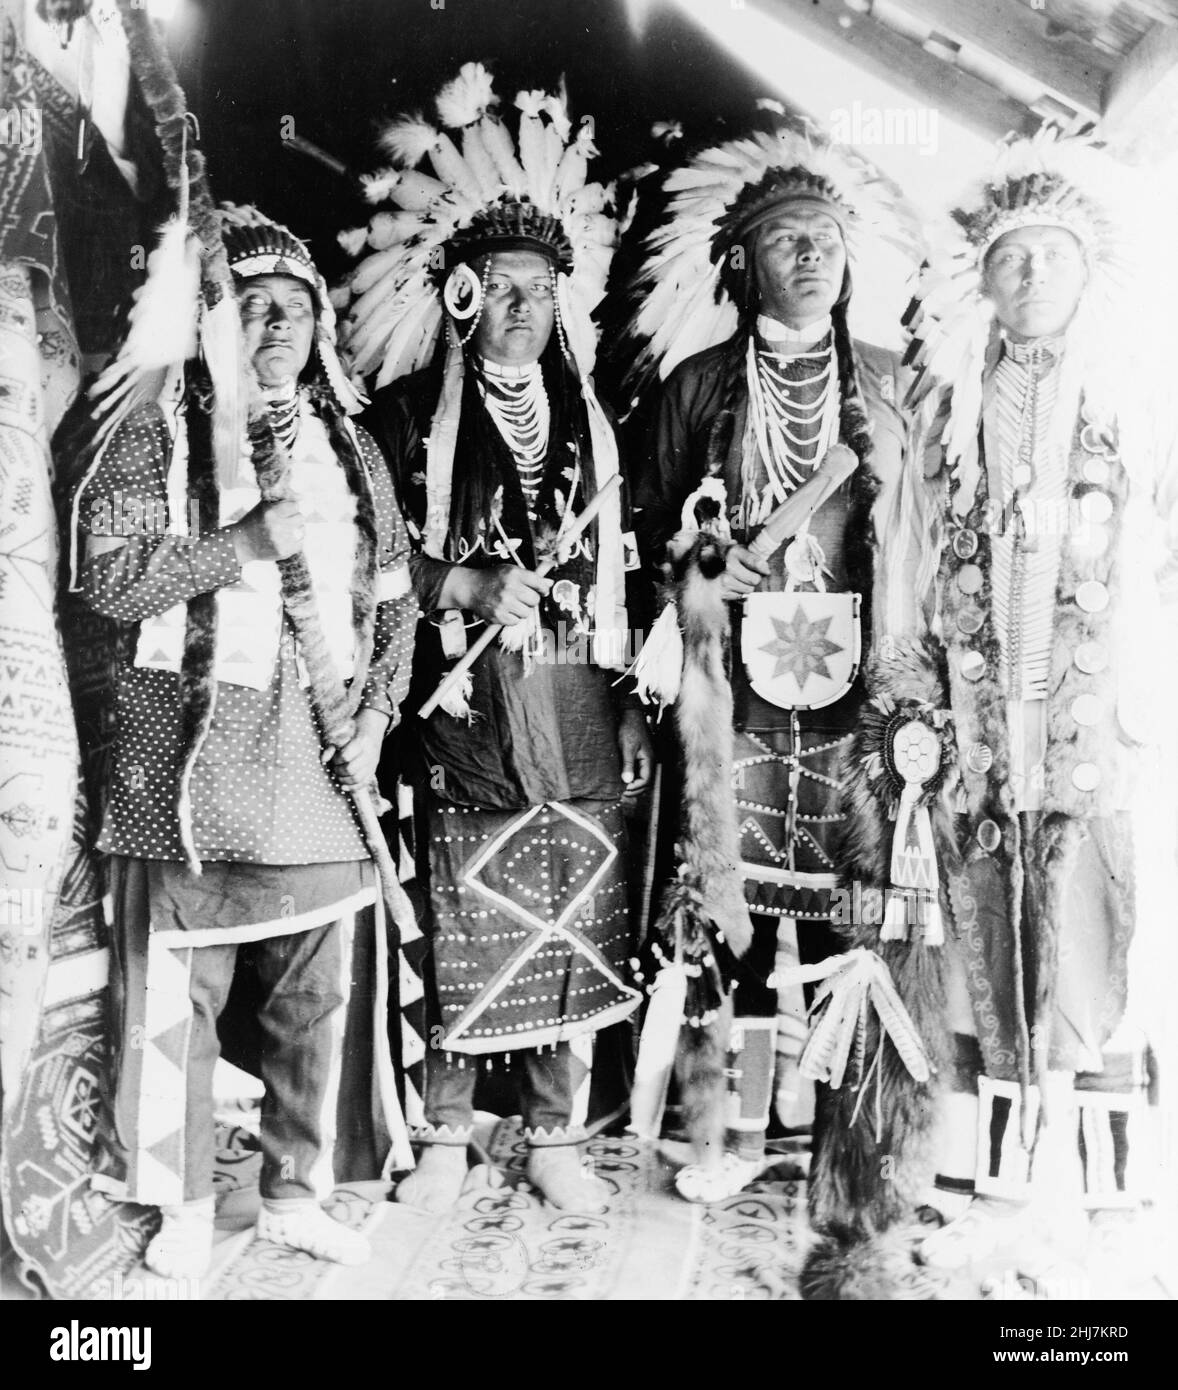 Four Nez Percé Indians, dressed for dance, on Colville Indian Reservation (native americans) c 1910. Photo by Clair Hunt. Stock Photo